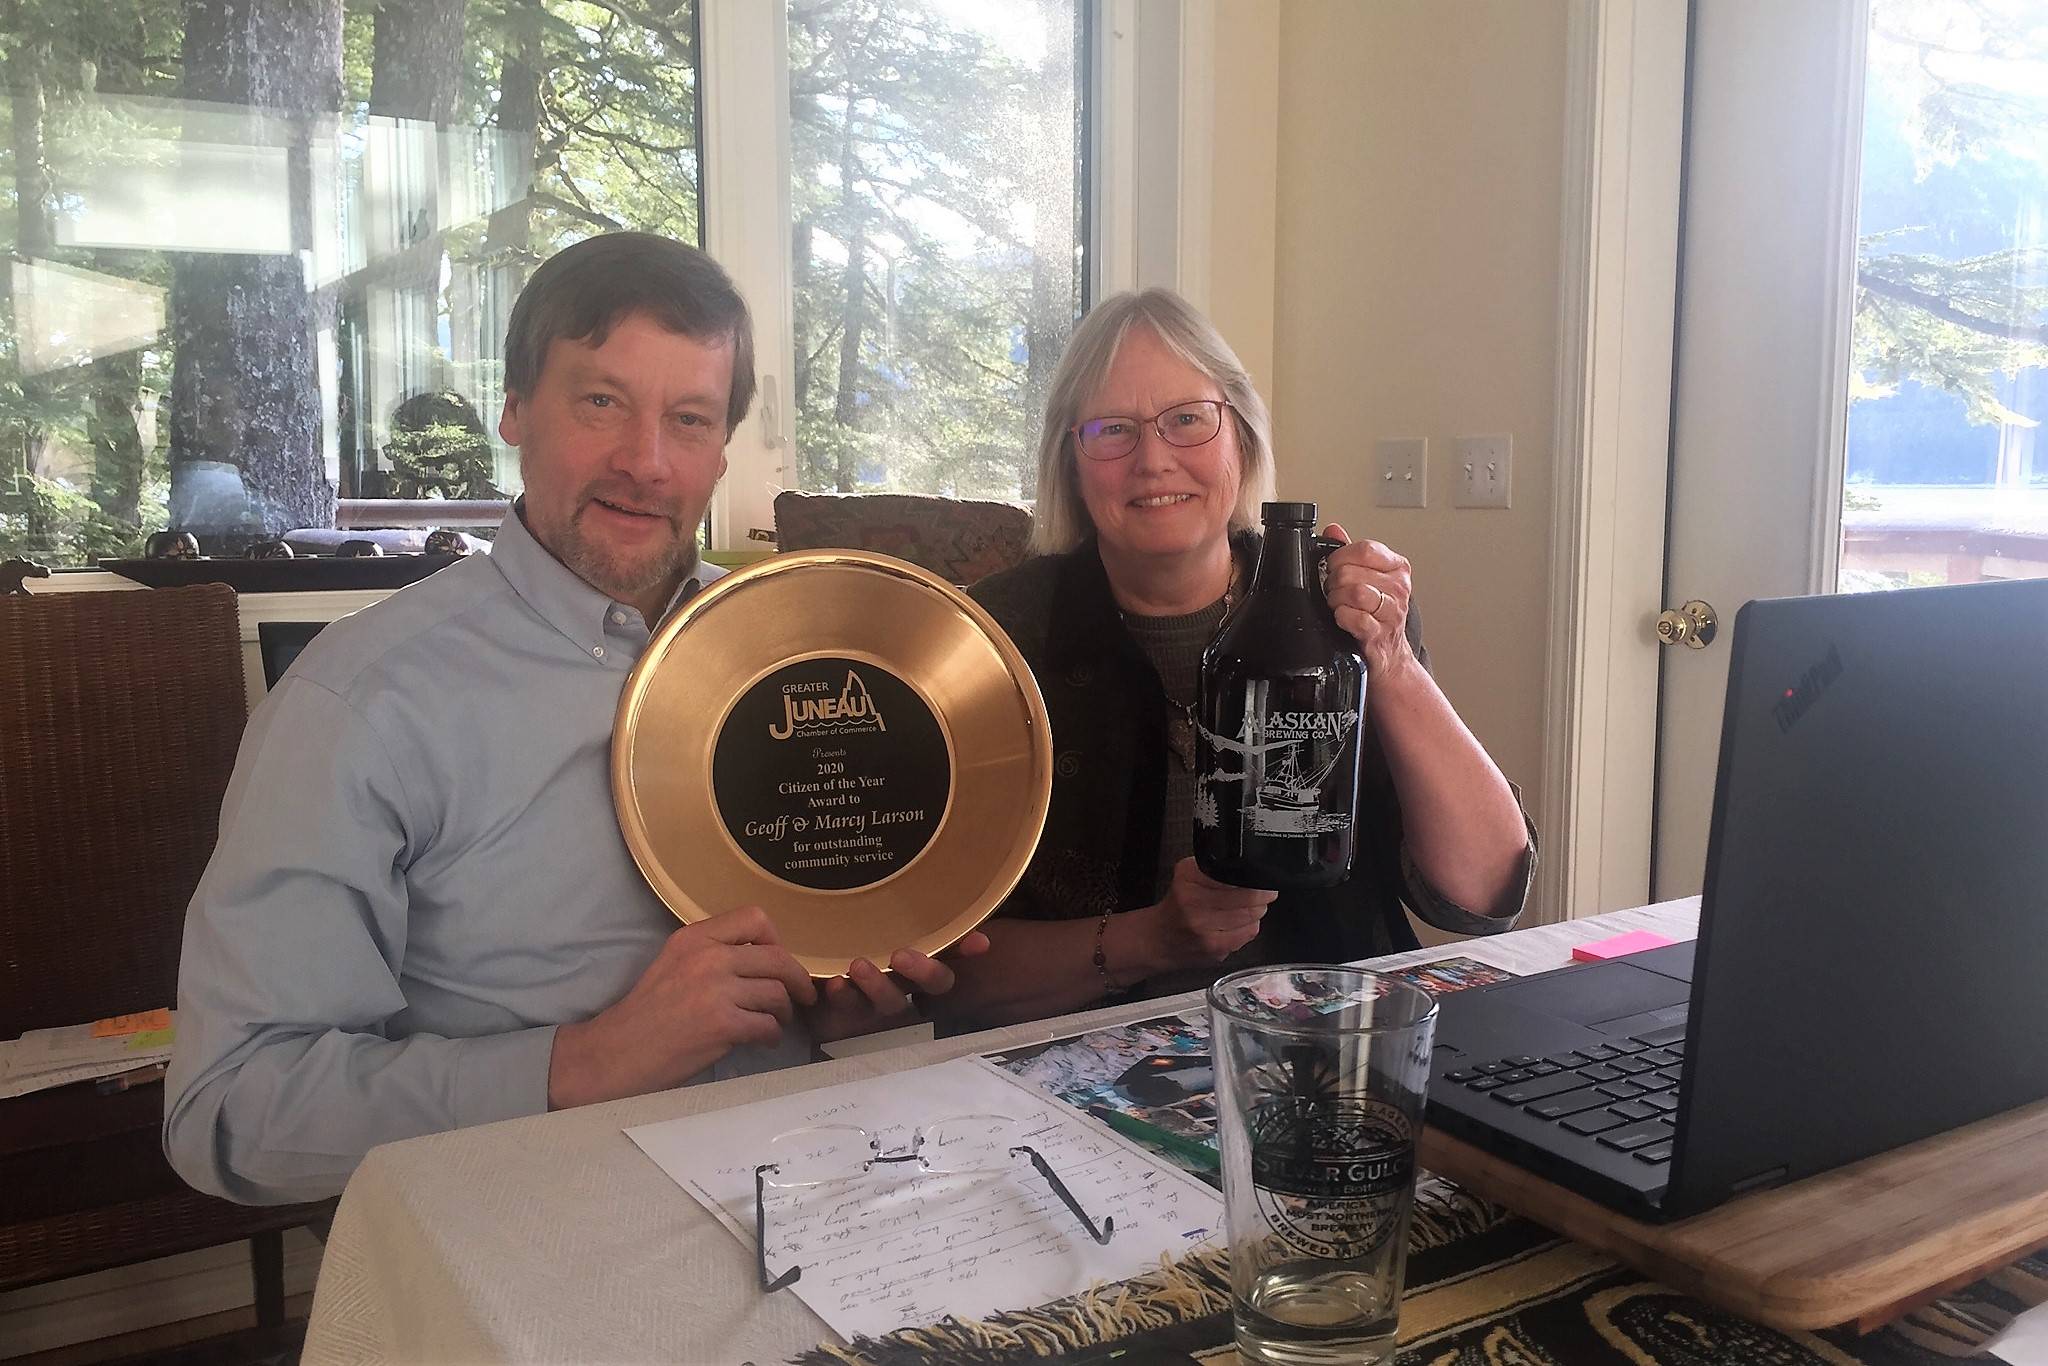 Geoff and Mary Larson hold up their Citizen of the Year Award from the Greater Juneau Chamber of Commerce. (Courtesy photo / Alaskan Brewing Company)